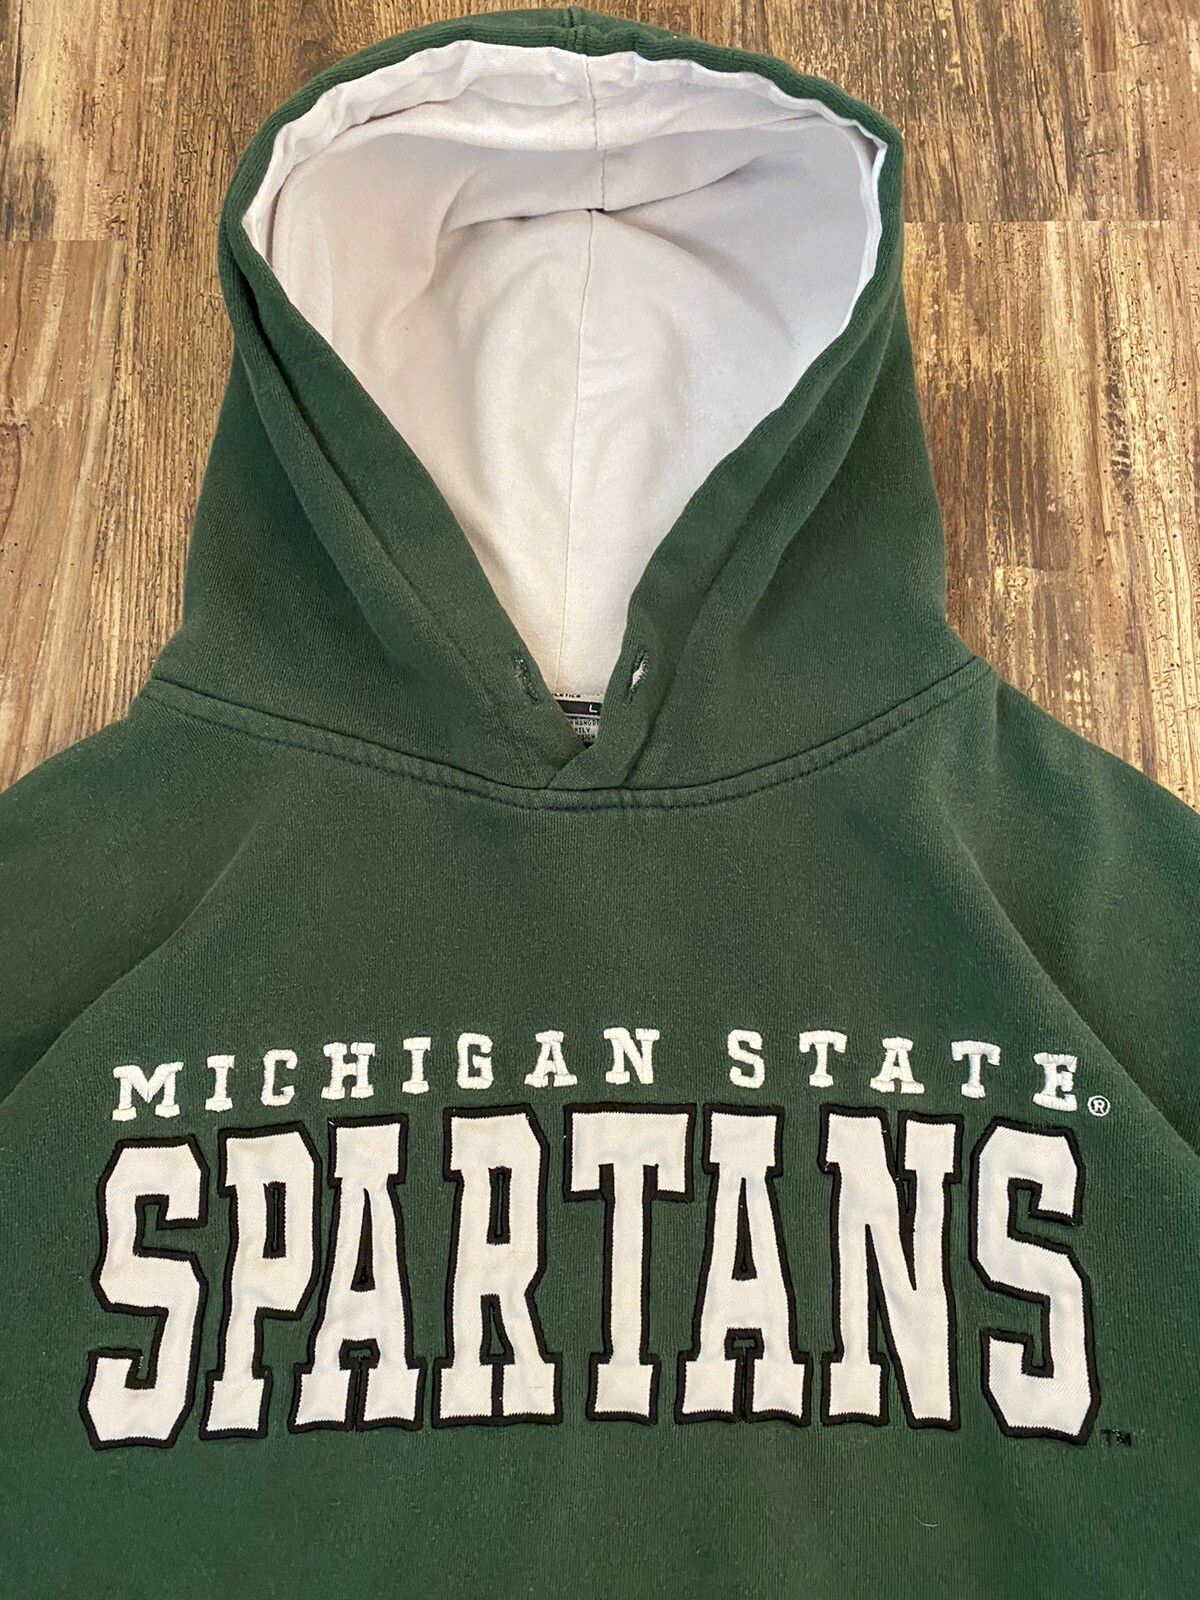 Vintage Y2K 2000s Faded Michigan State Spartans Spellout Hoodie Size US S / EU 44-46 / 1 - 3 Thumbnail